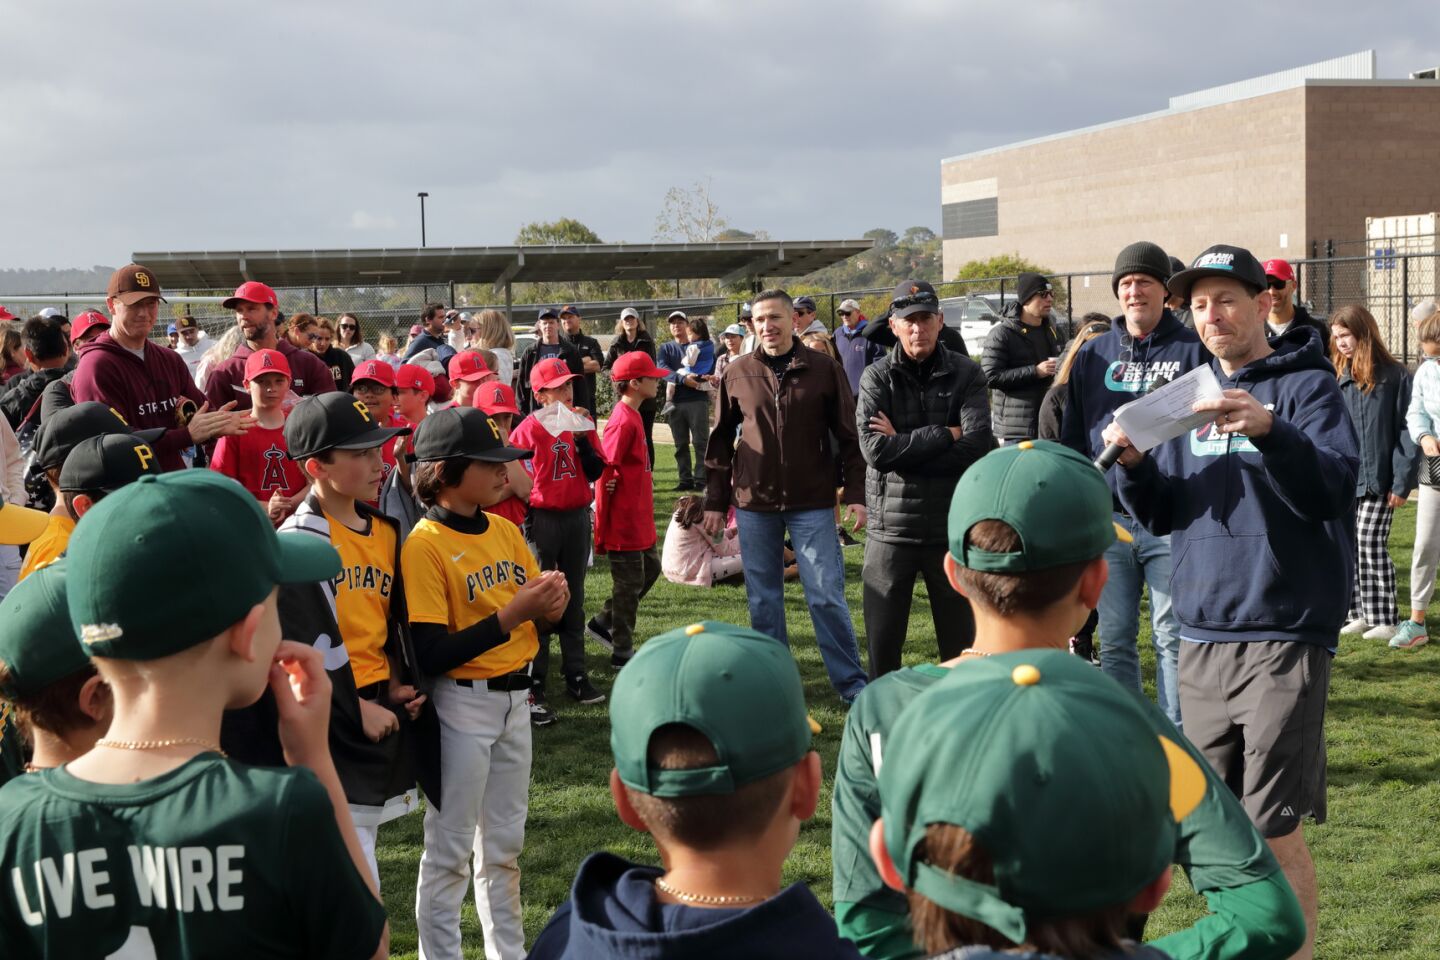 SBLL President Dan Krems welcomes players and families to the 2022 Little League season in Solana Beach